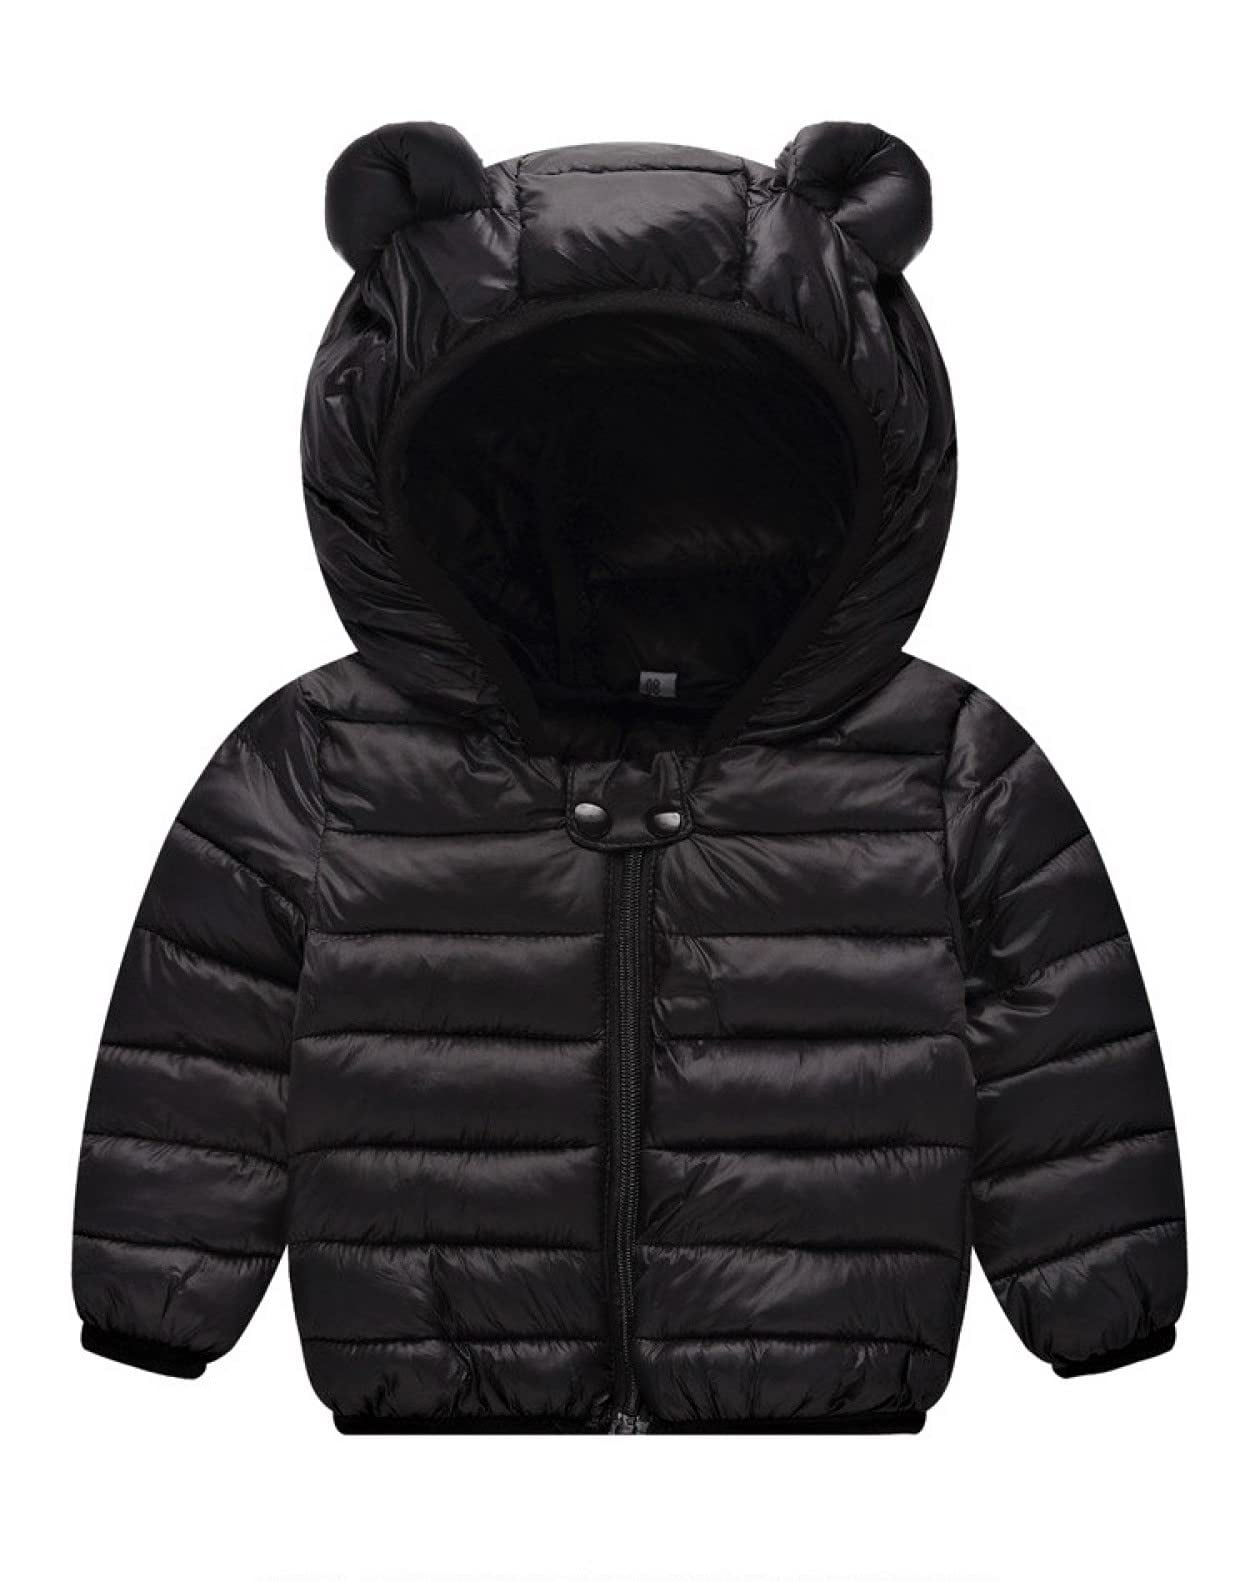 $850 Gucci Kids Lightweight Reversible Puffer Jacket Web Hooded 12-18 Month  NWT